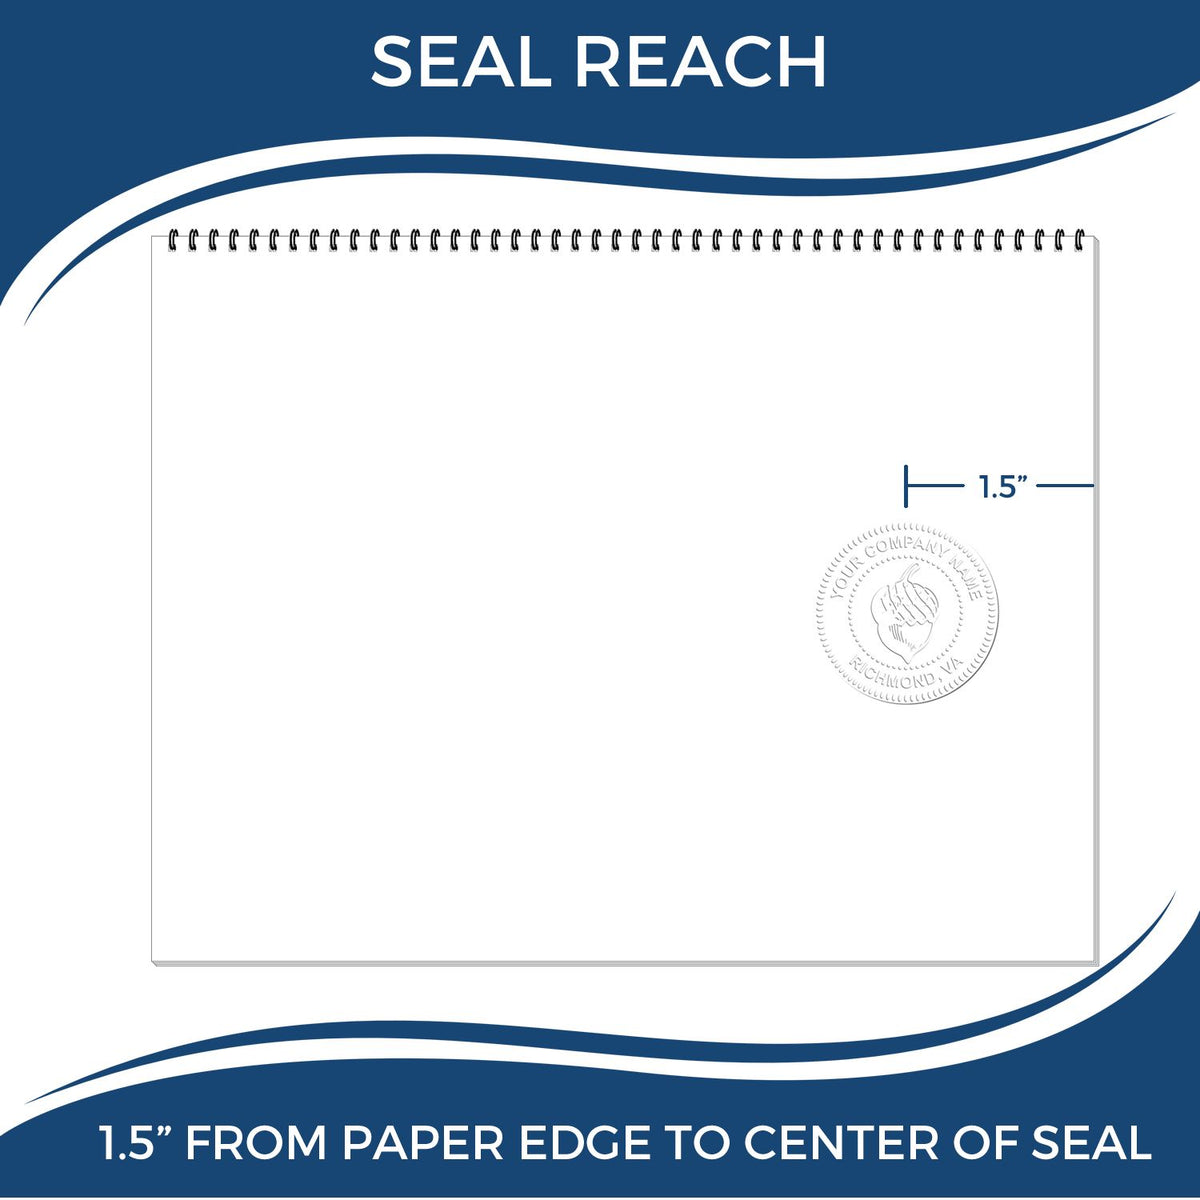 An infographic showing the seal reach which is represented by a ruler and a miniature seal image of the Hybrid Minnesota Engineer Seal